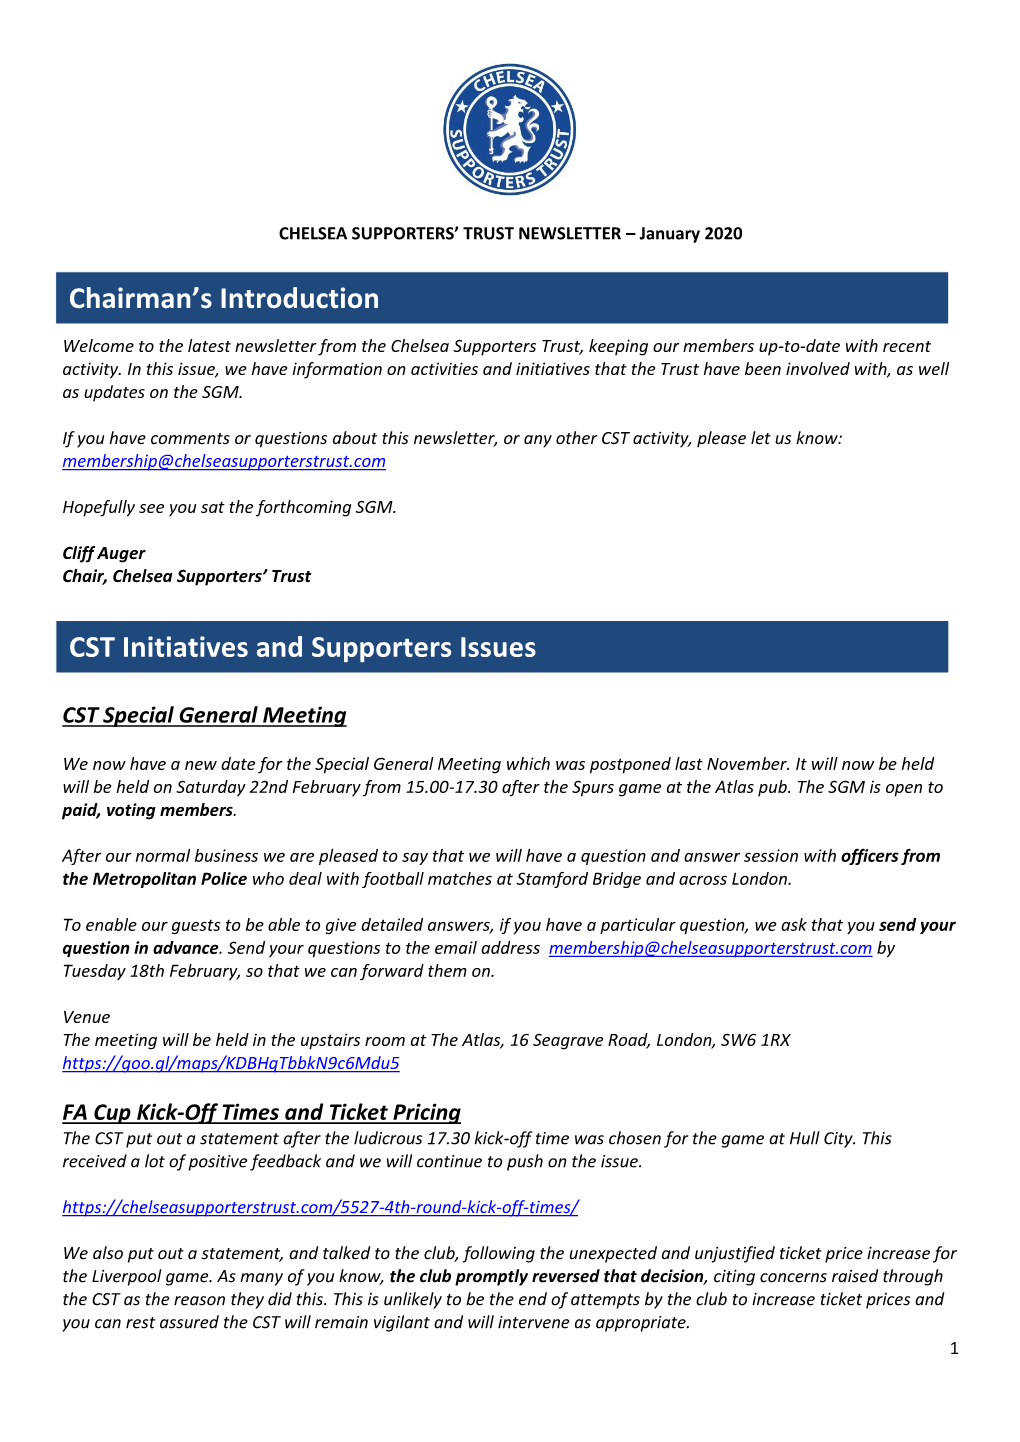 Chairman's Introduction CST Initiatives and Supporters Issues